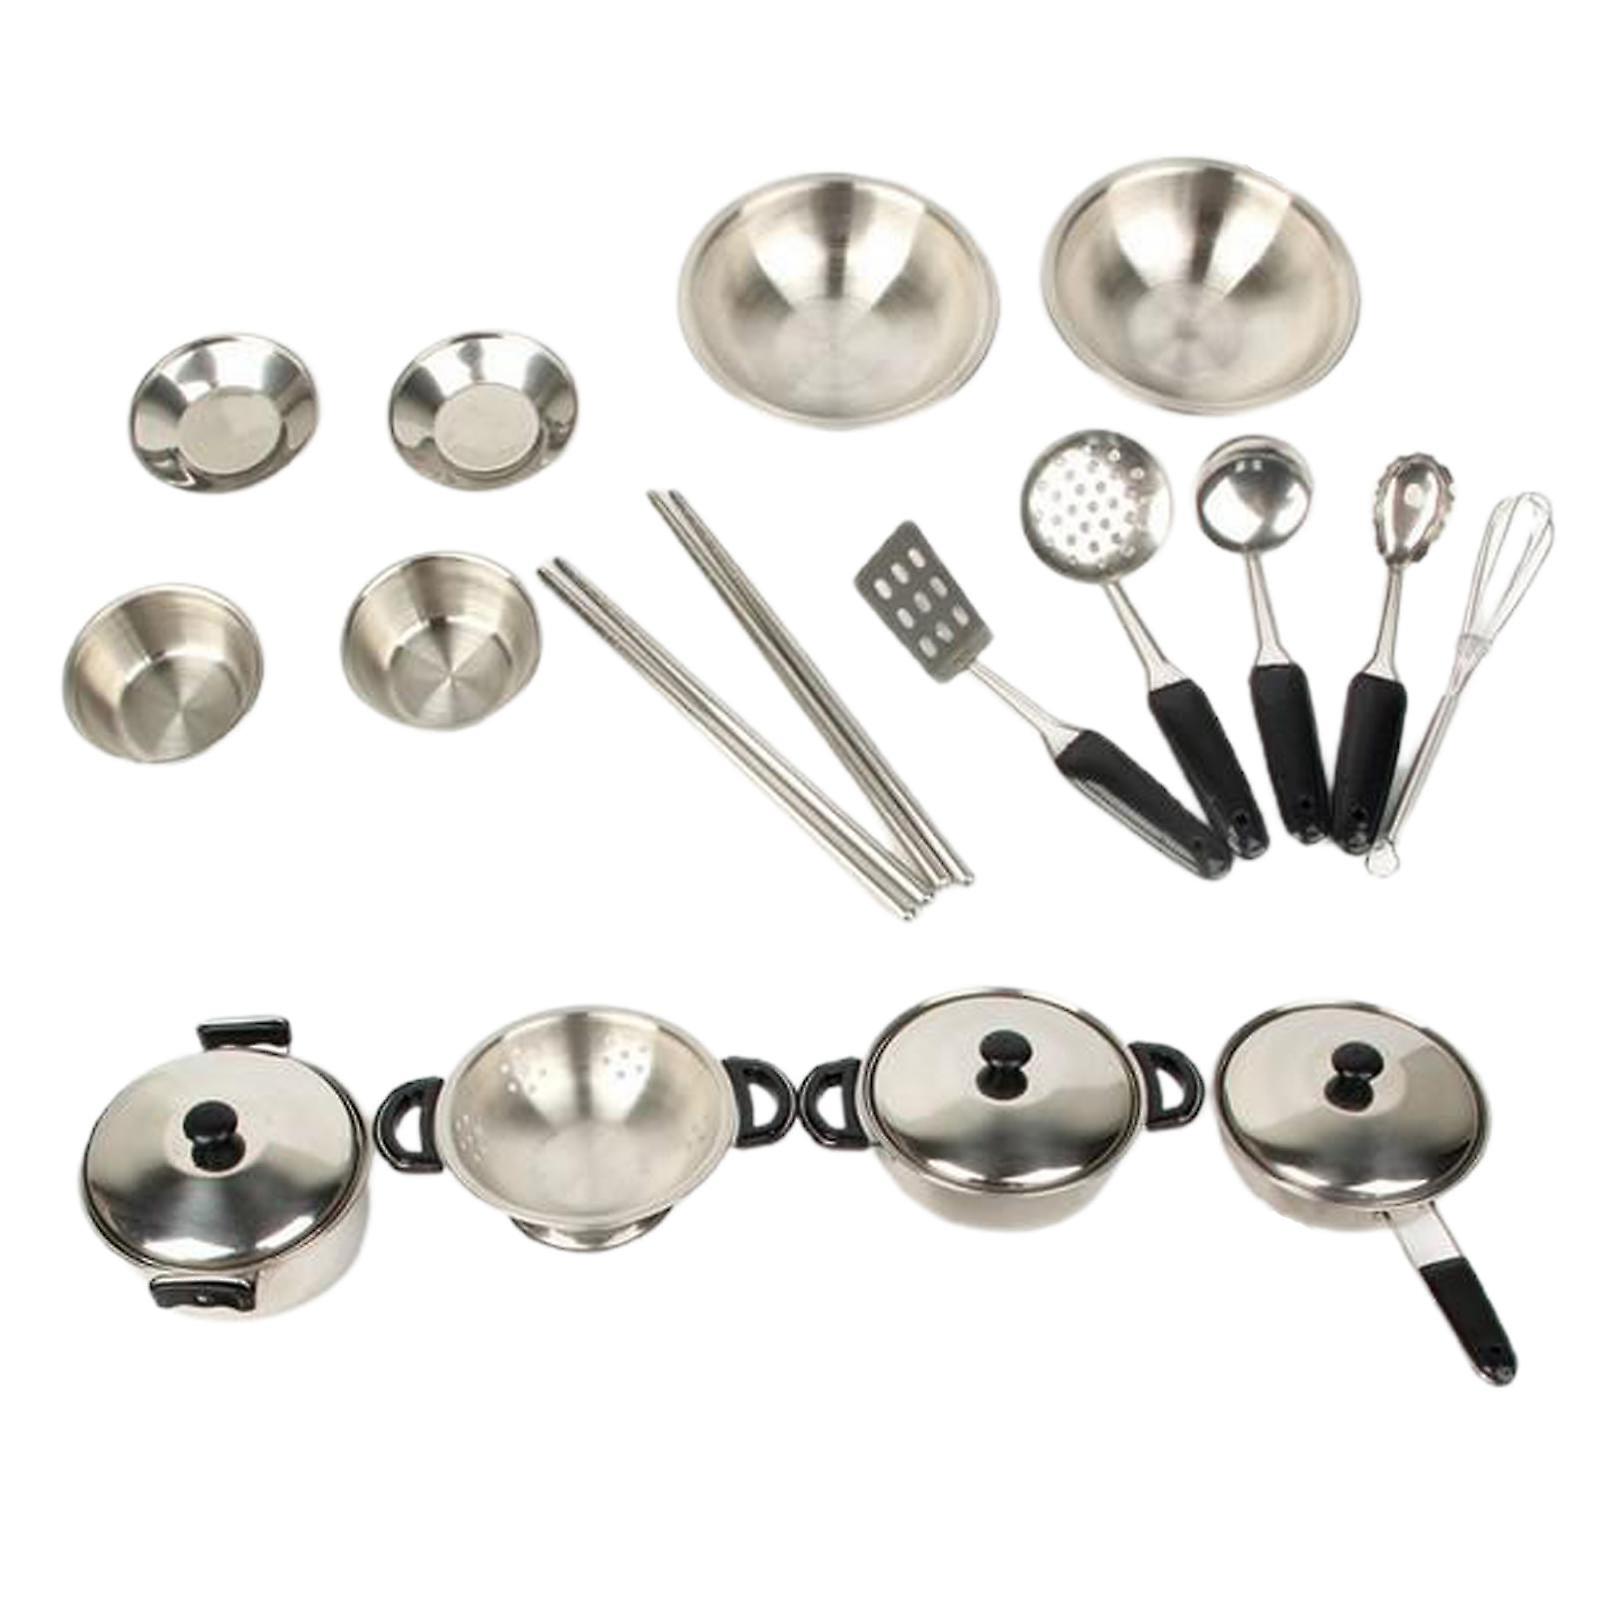 20x Kitchen Pretend Play Toys Stainless Steel Cookware Pots And Pans Set